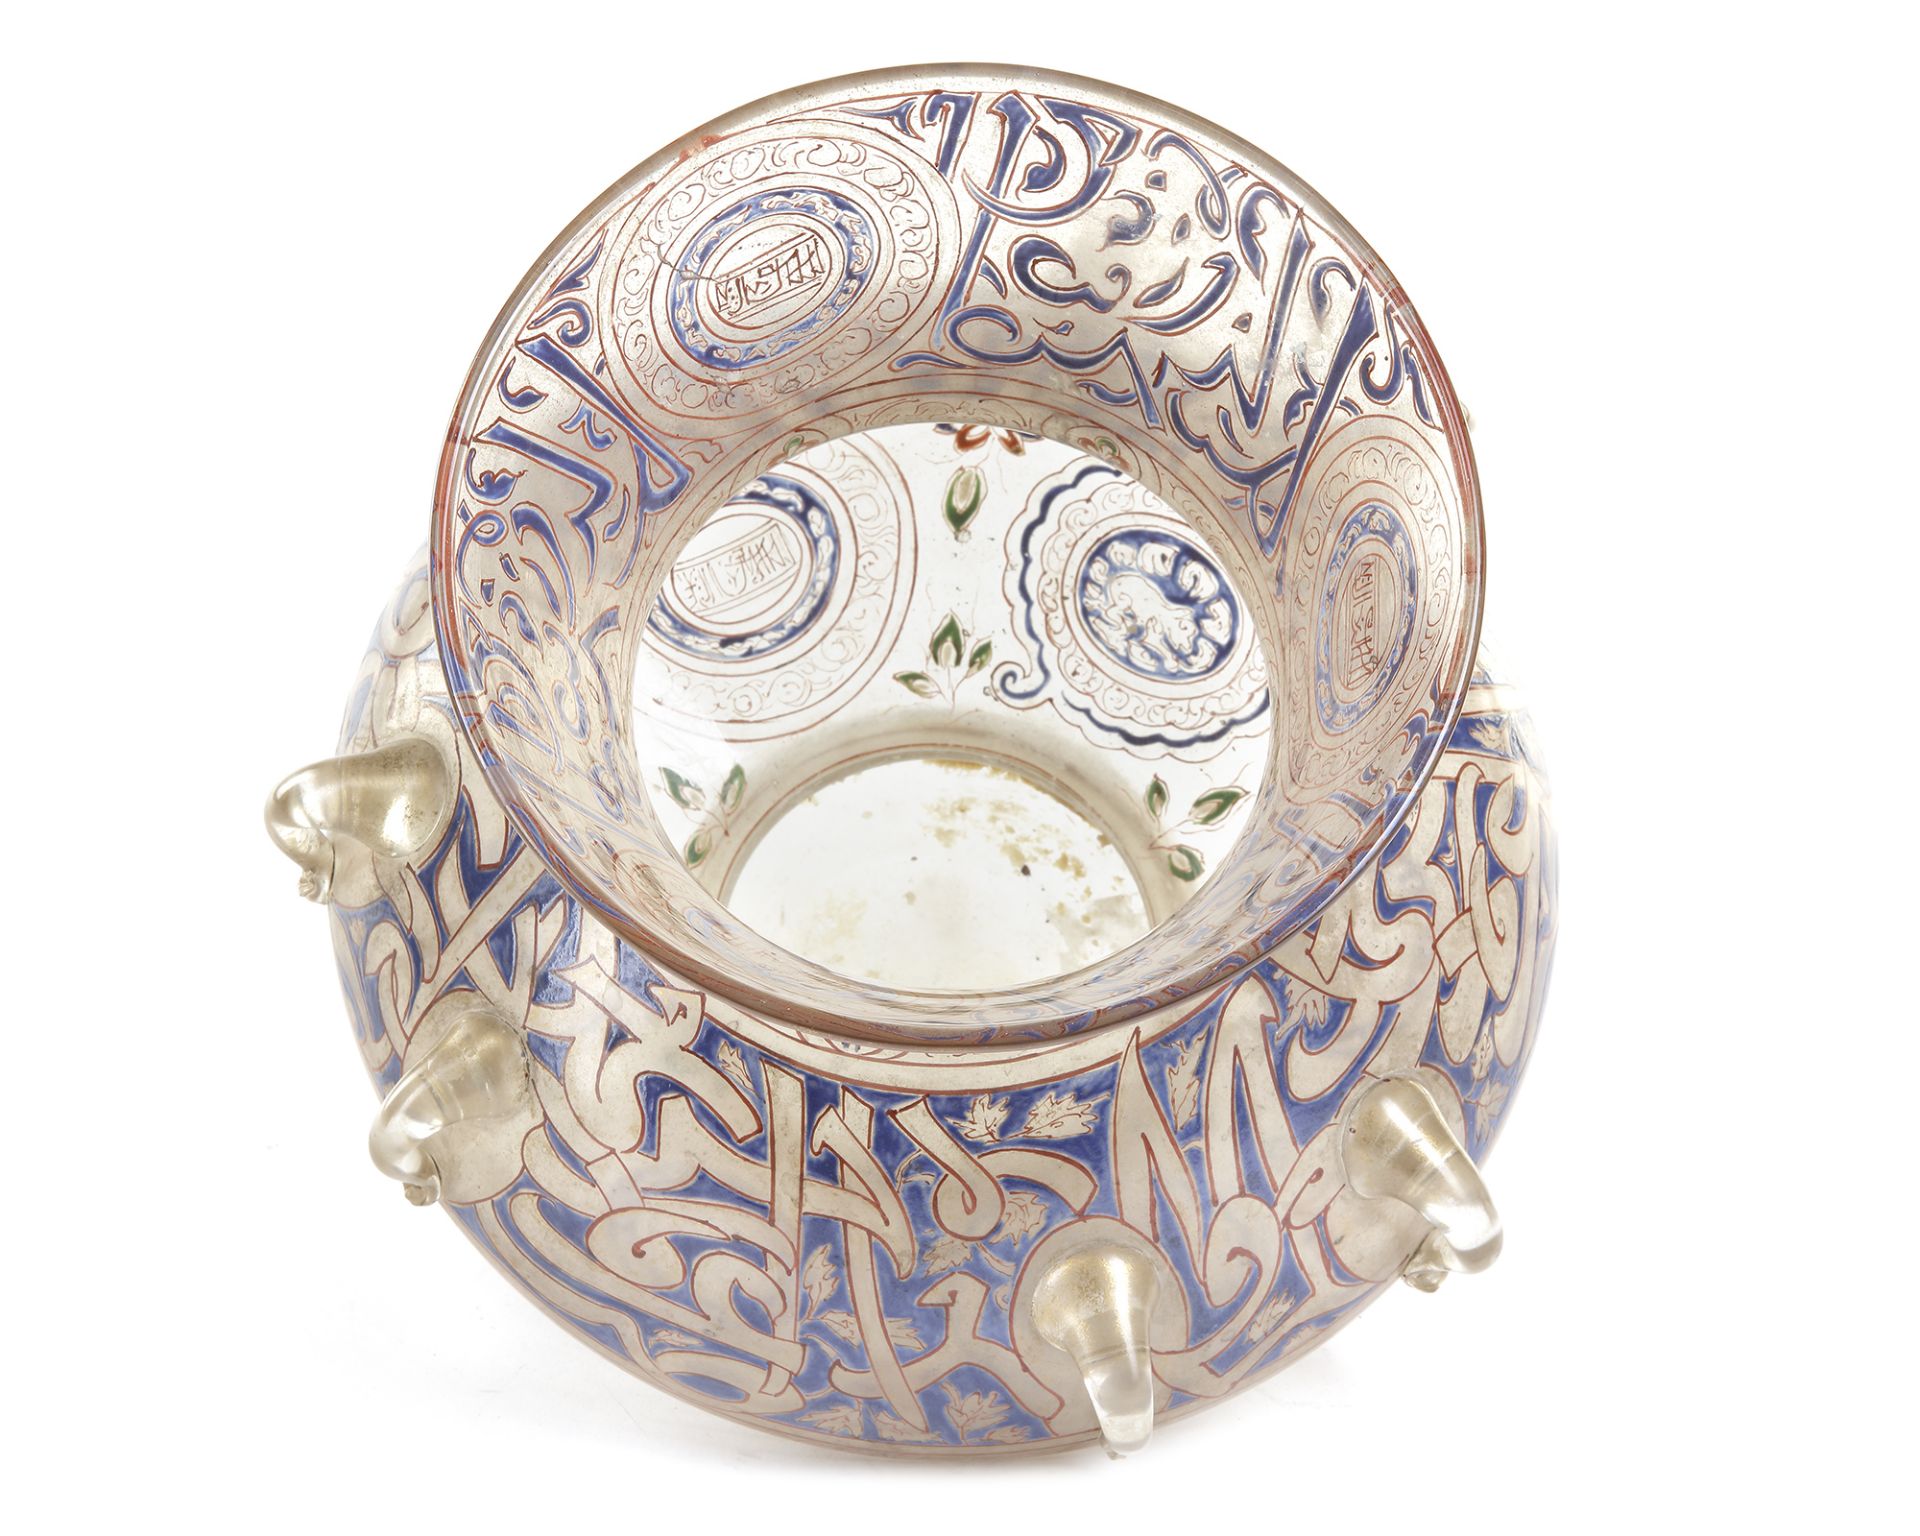 A MAMLUK-STYLE ENAMELLED CLEAR GLASS MOSQUE LAMP POSSIBLY BROCARD, FRANCE, SECOND HALF 19TH CENTURY - Image 5 of 10